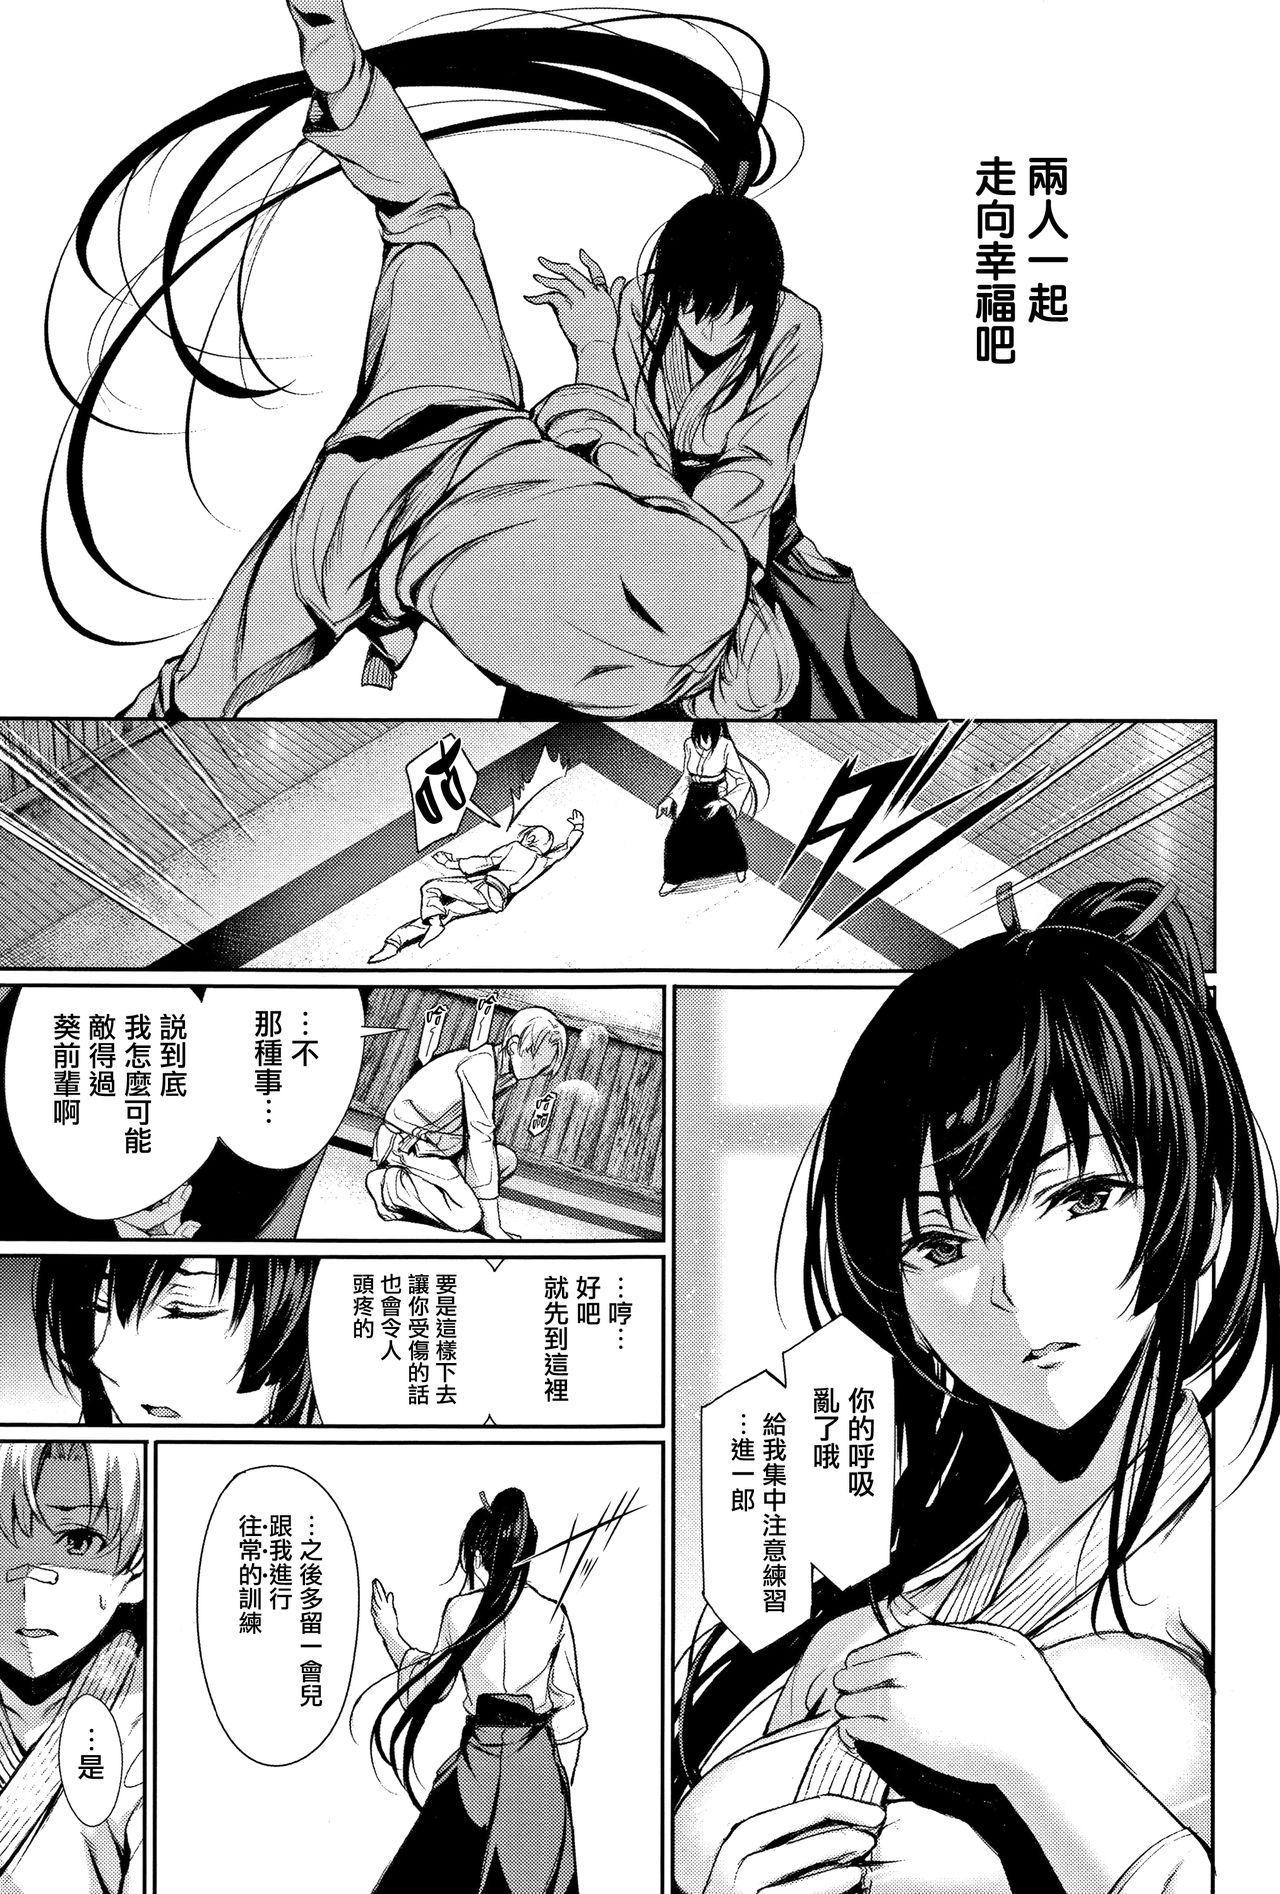 Whores Kimi Omou Koi - I think of you. Ch. 1 Shower - Page 8